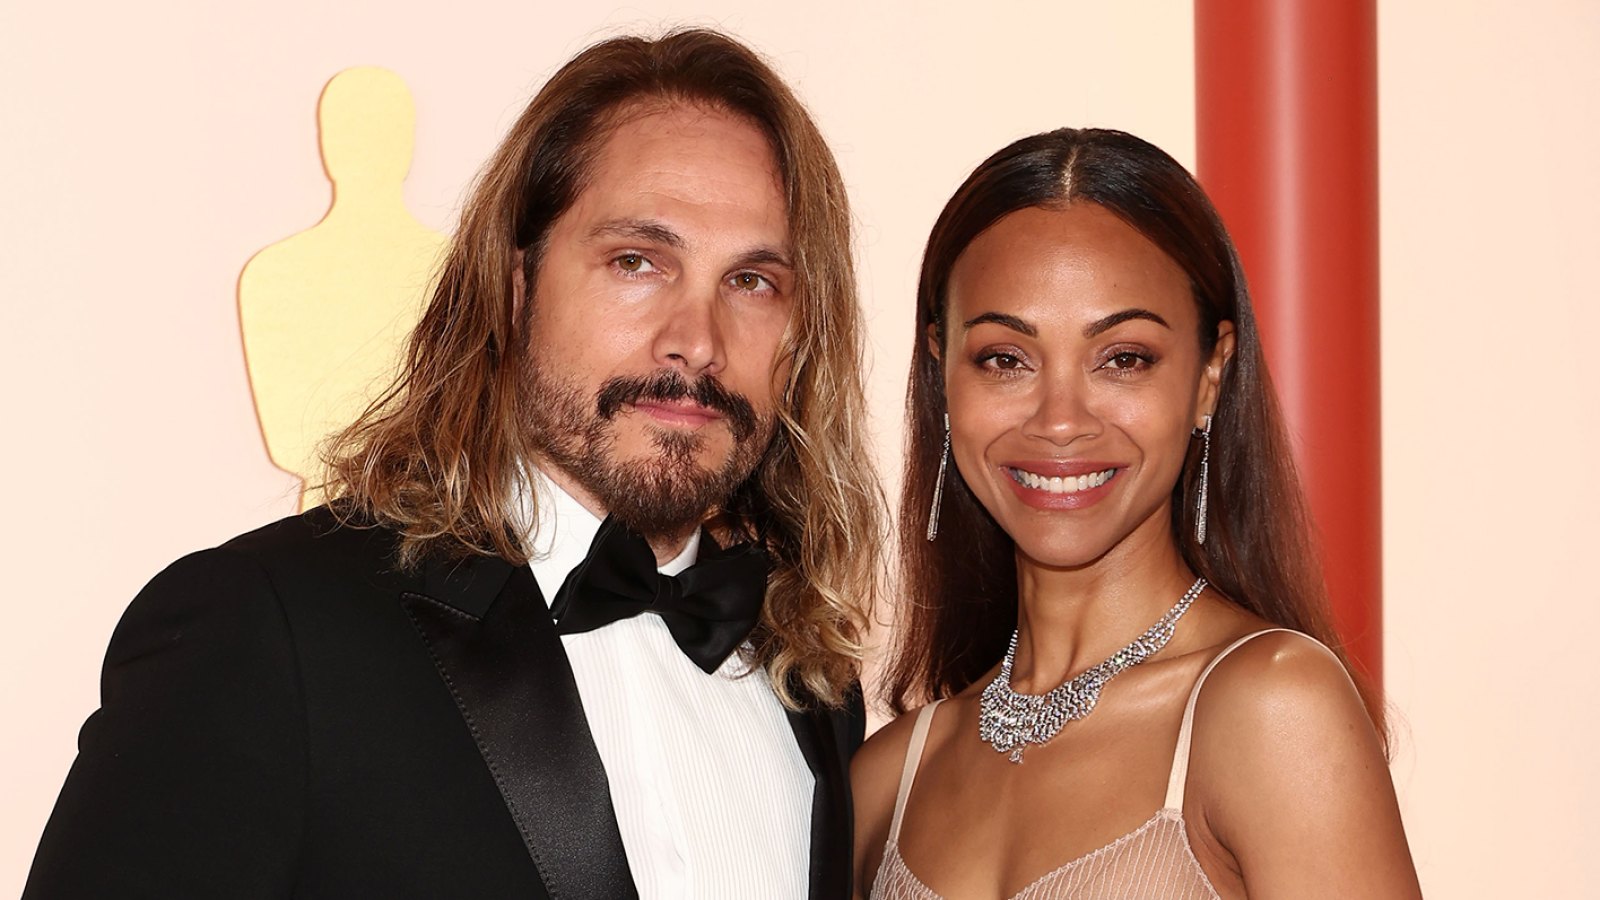 https://www.usmagazine.com/wp-content/uploads/2023/06/Zoe-Saldana-Poses-Topless-Shows-Rare-Glimpse-of-Her-Tattoo-of-Husband-Marco-Peregos-Face-Inline-01.jpg?crop=64px%2C23px%2C1416px%2C801px&resize=1600%2C900&quality=86&strip=all